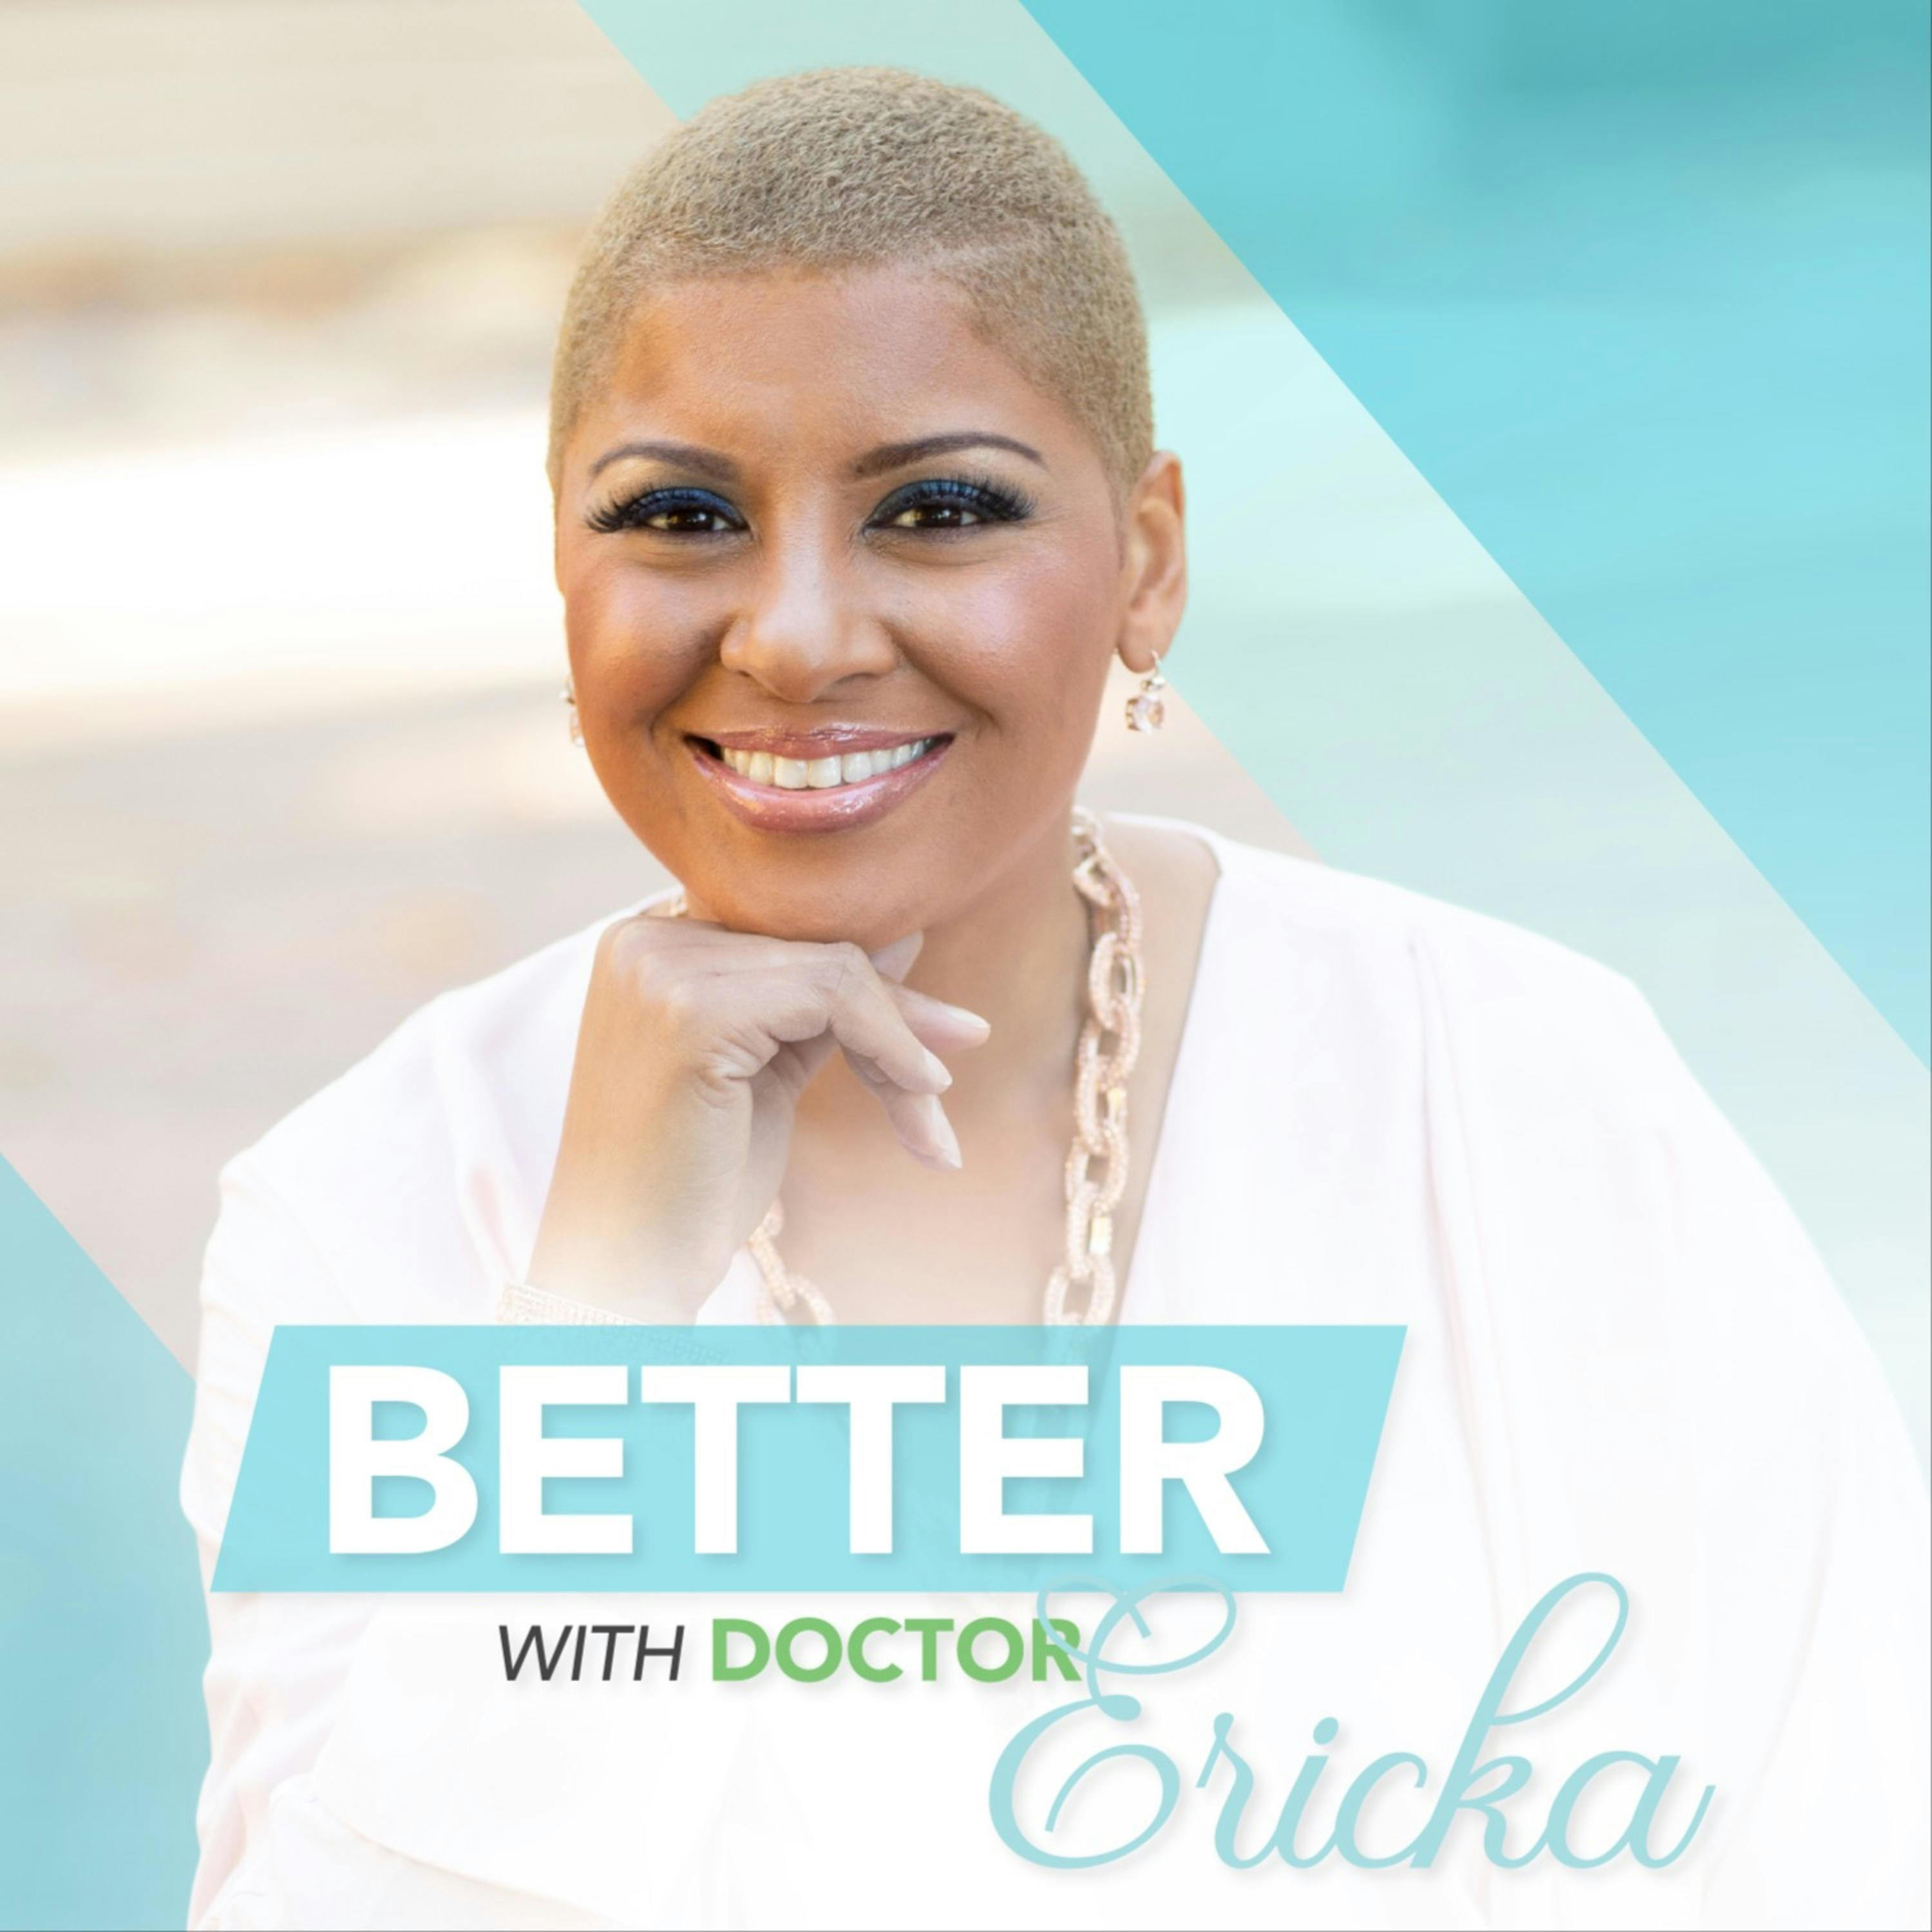 Introducing Better with Dr. Ericka